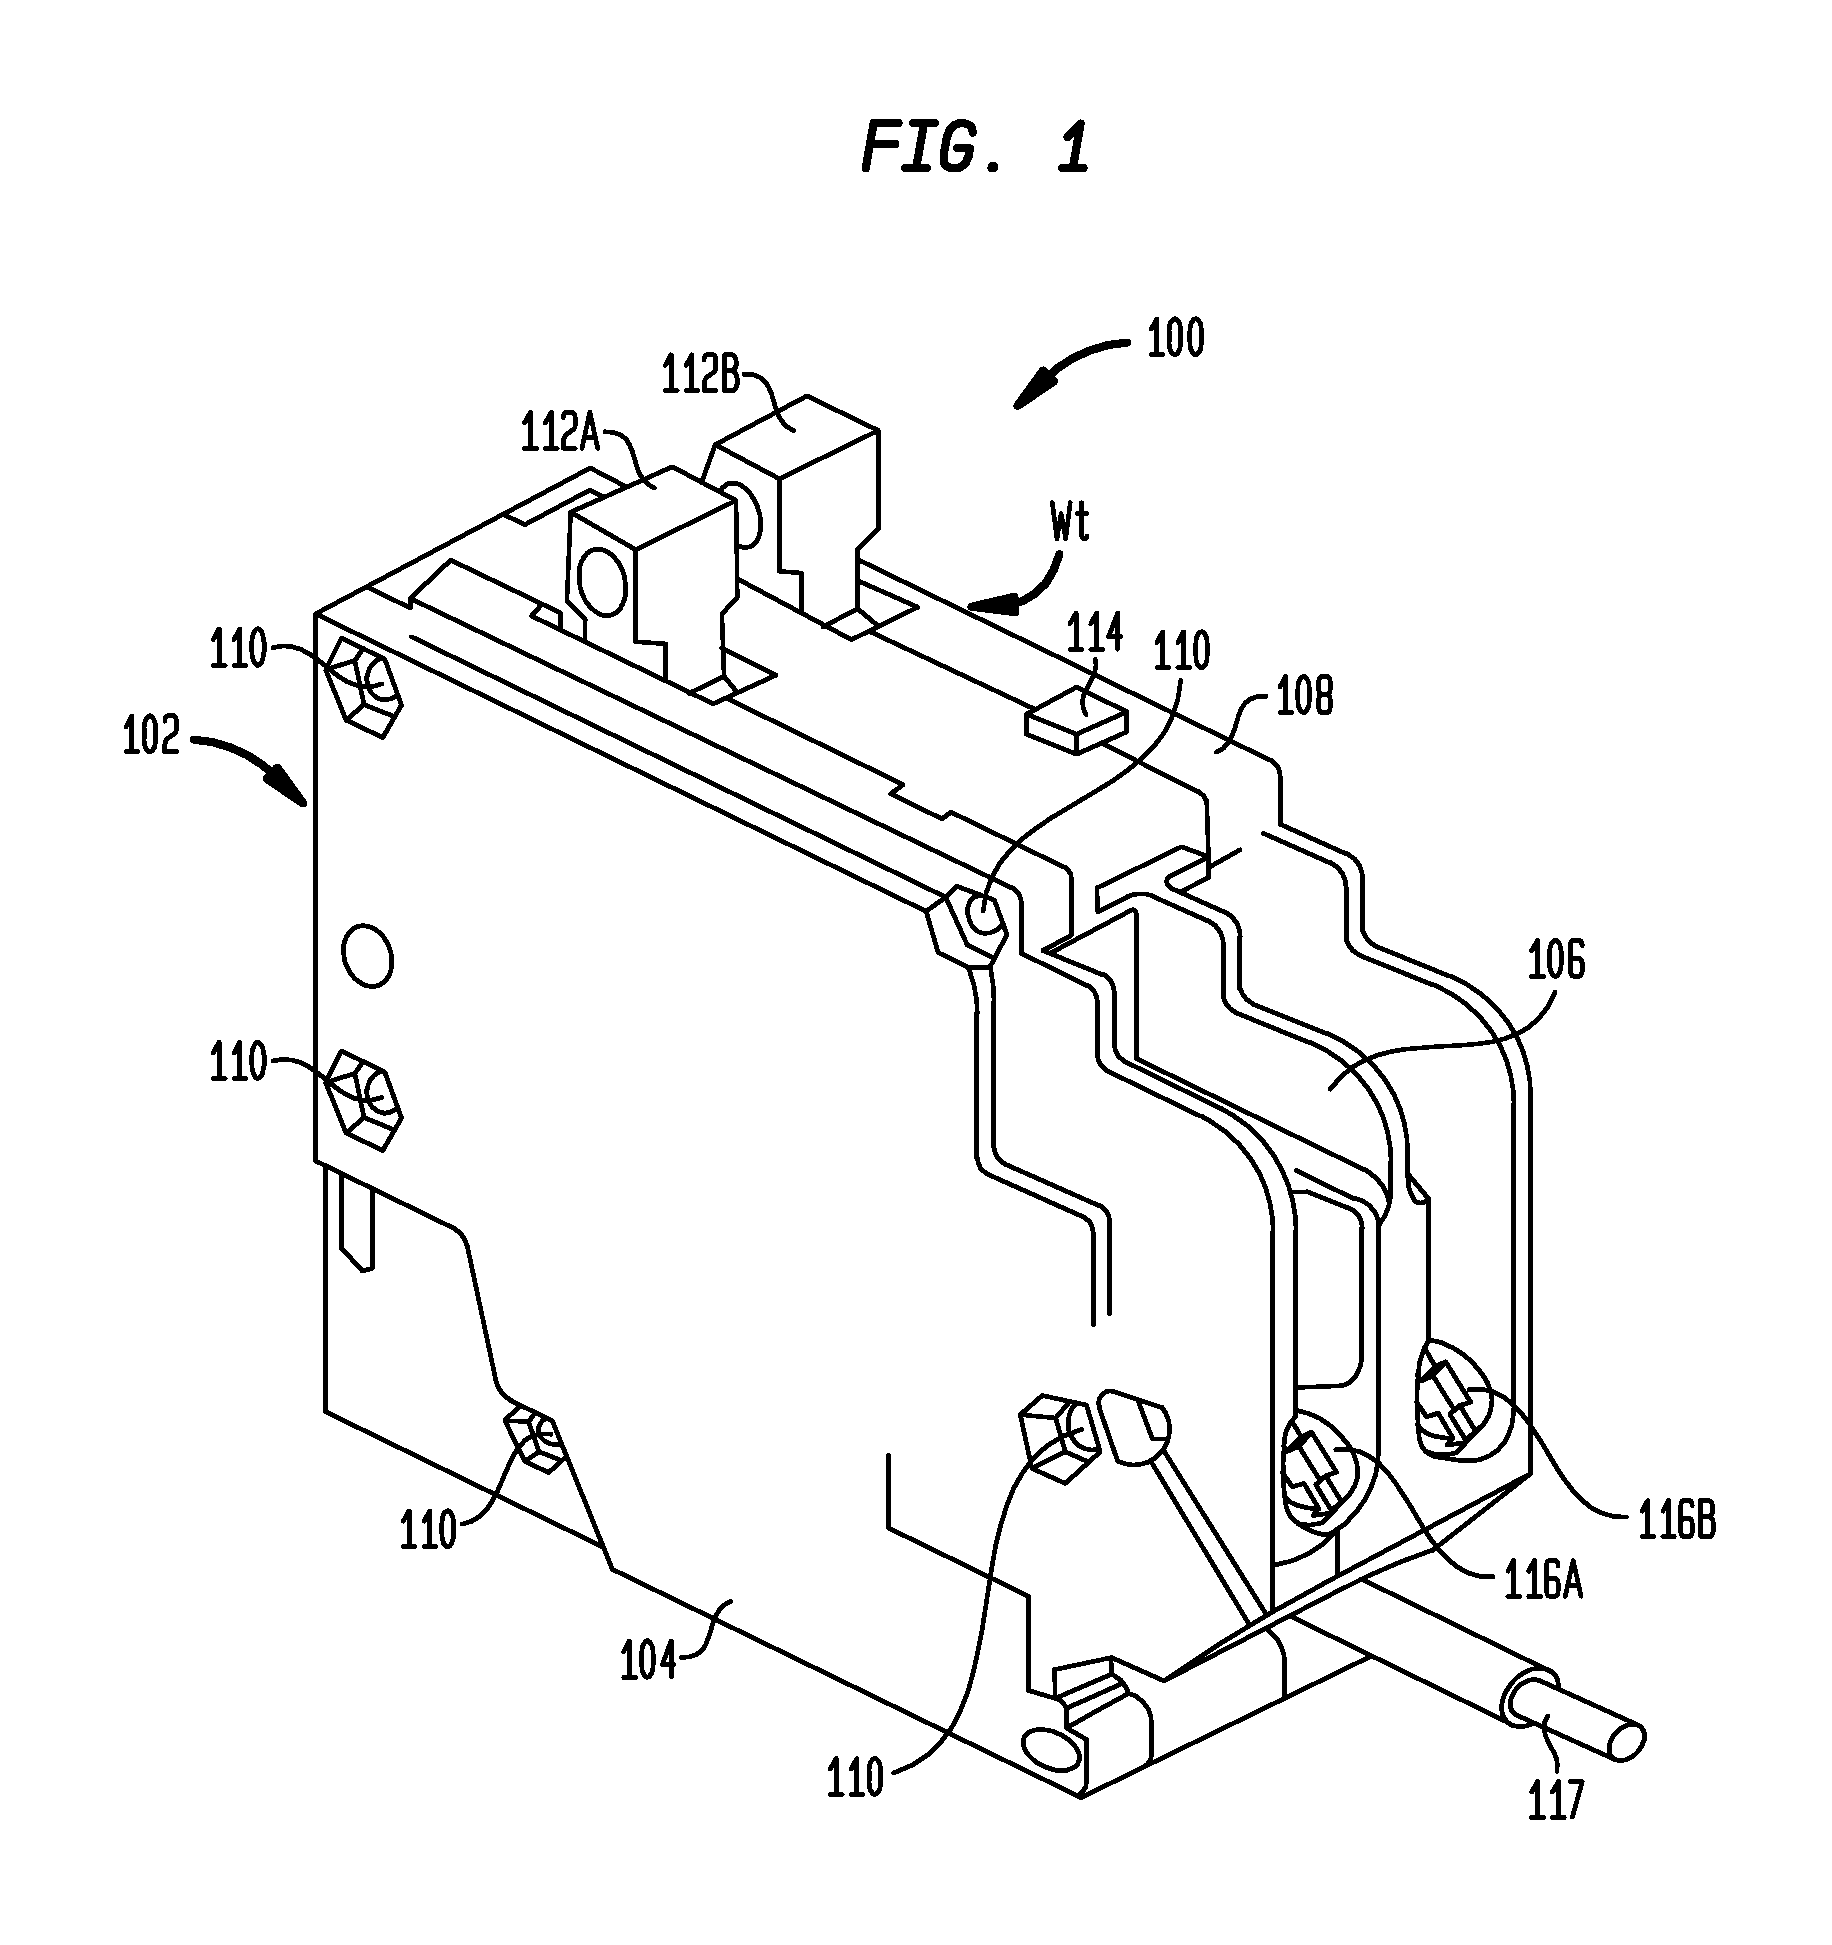 Low-profile electronic circuit breakers, breaker tripping mechanisms, and systems and methods of using same